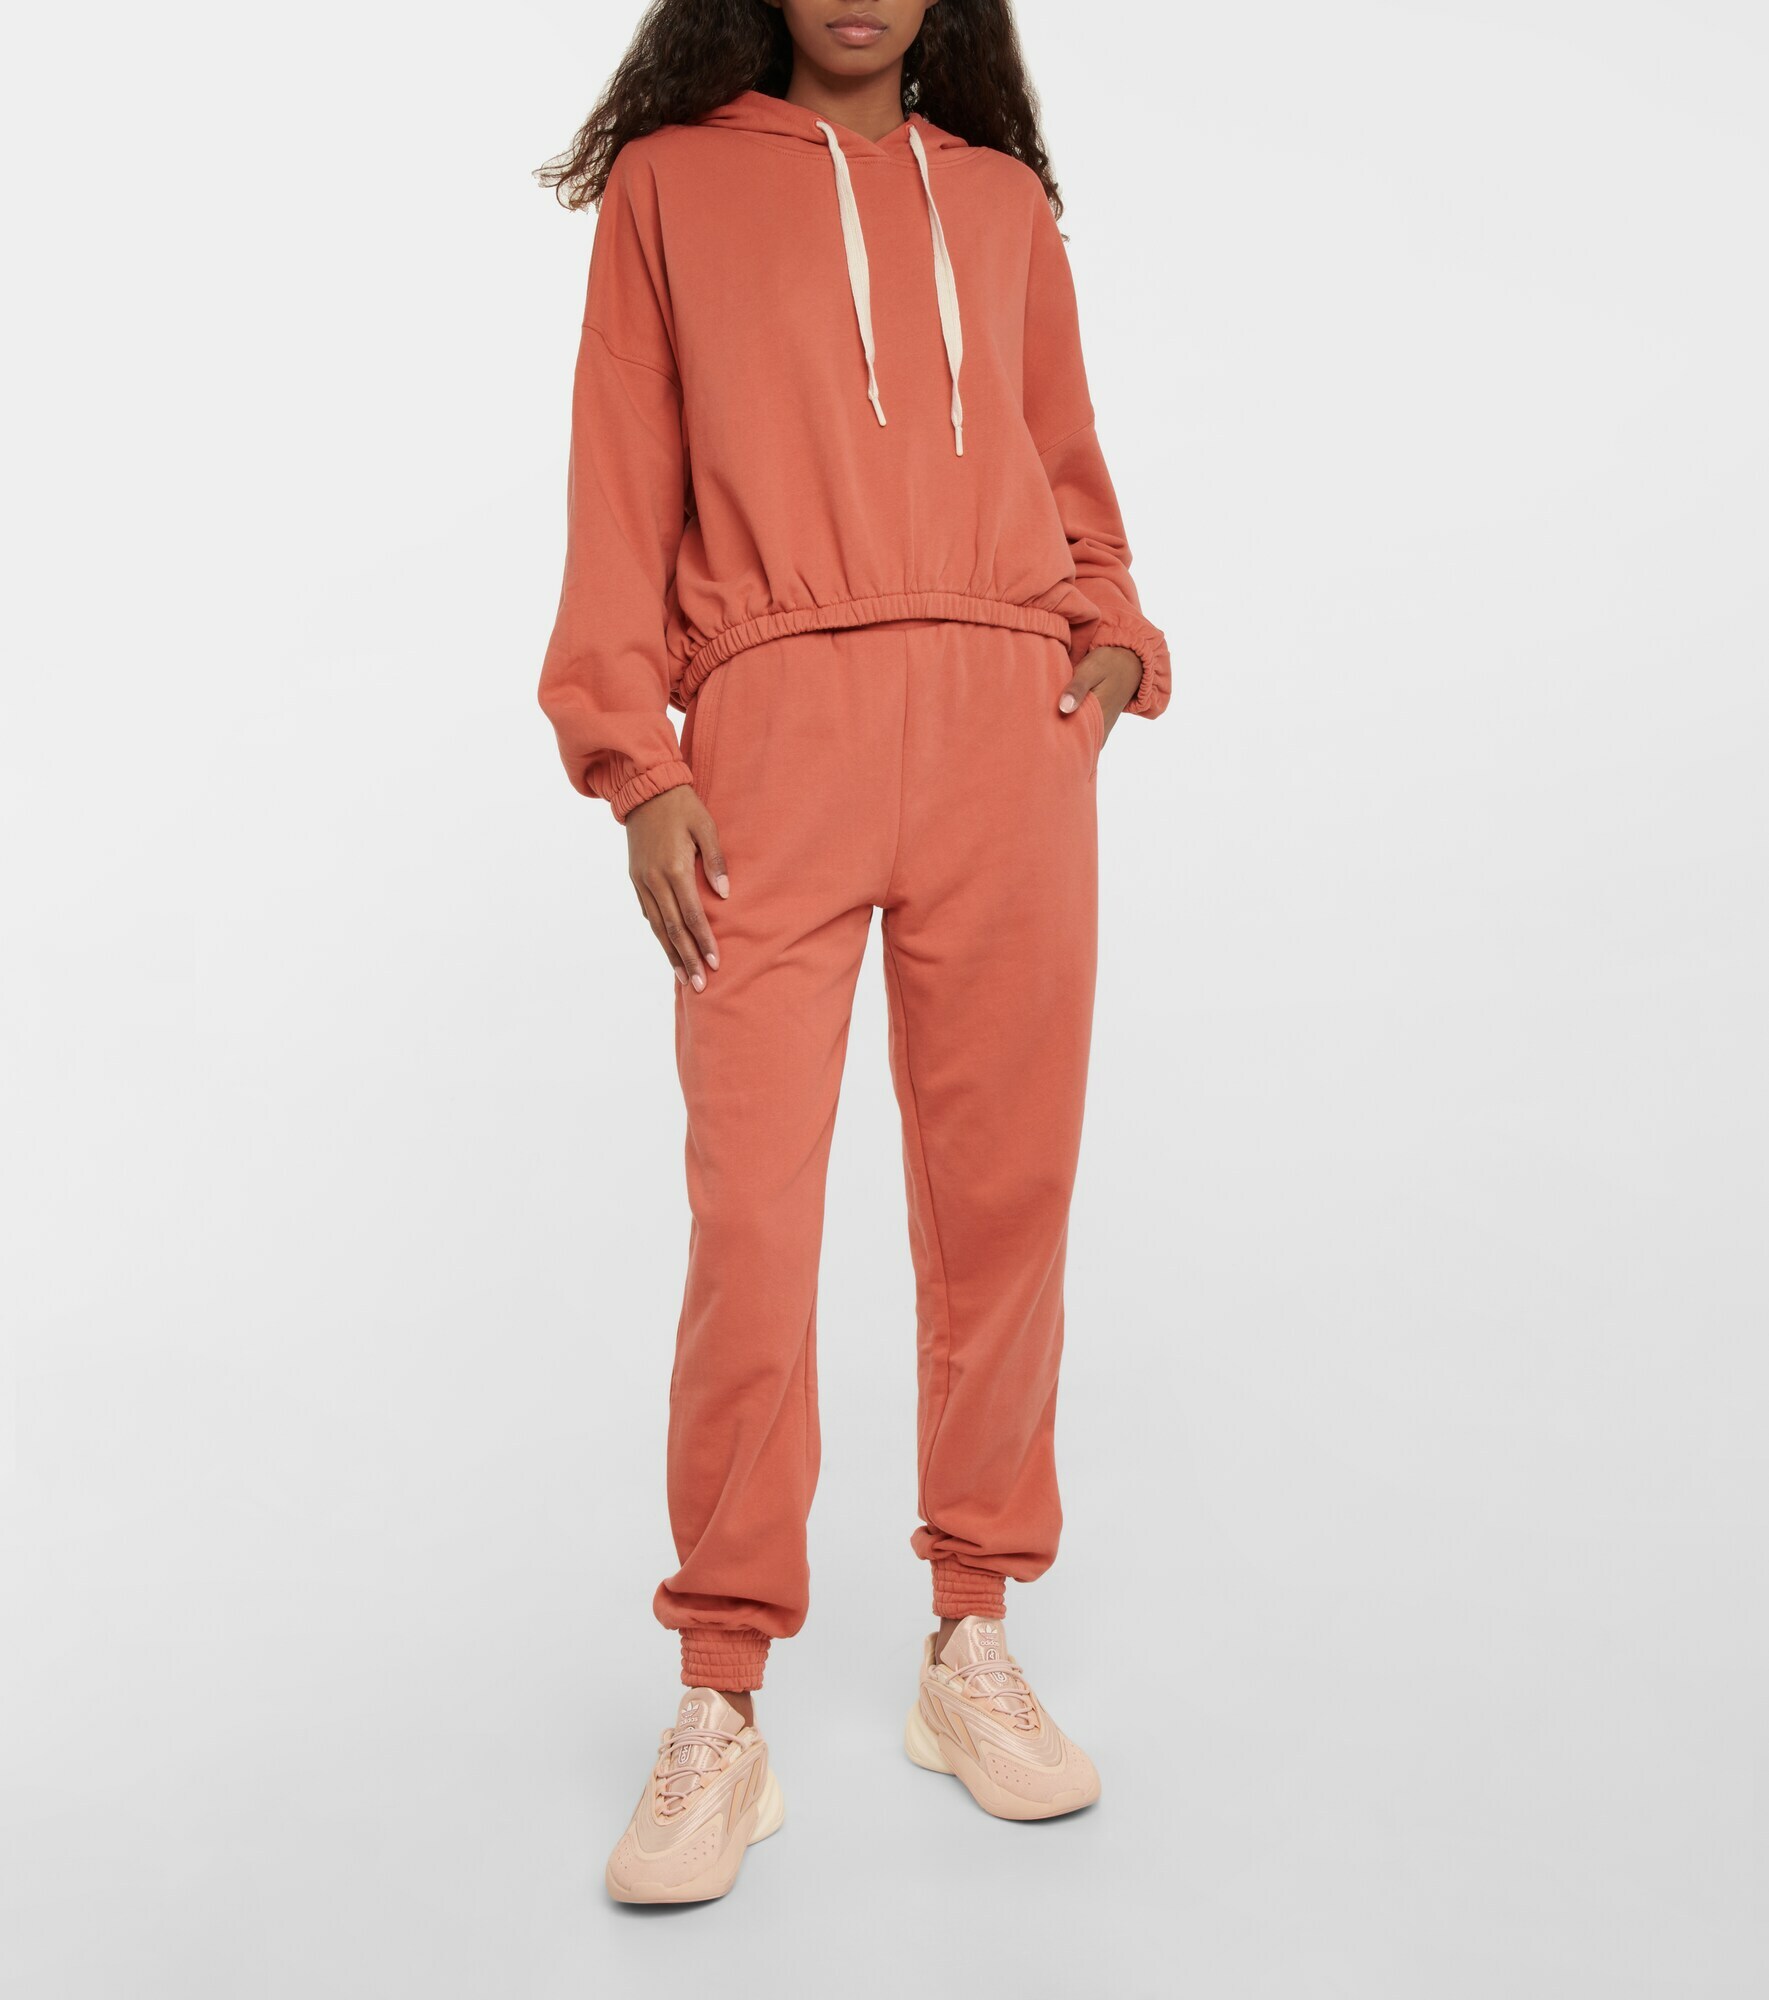 The Upside - Caprice Amelie cotton hoodie The Upside